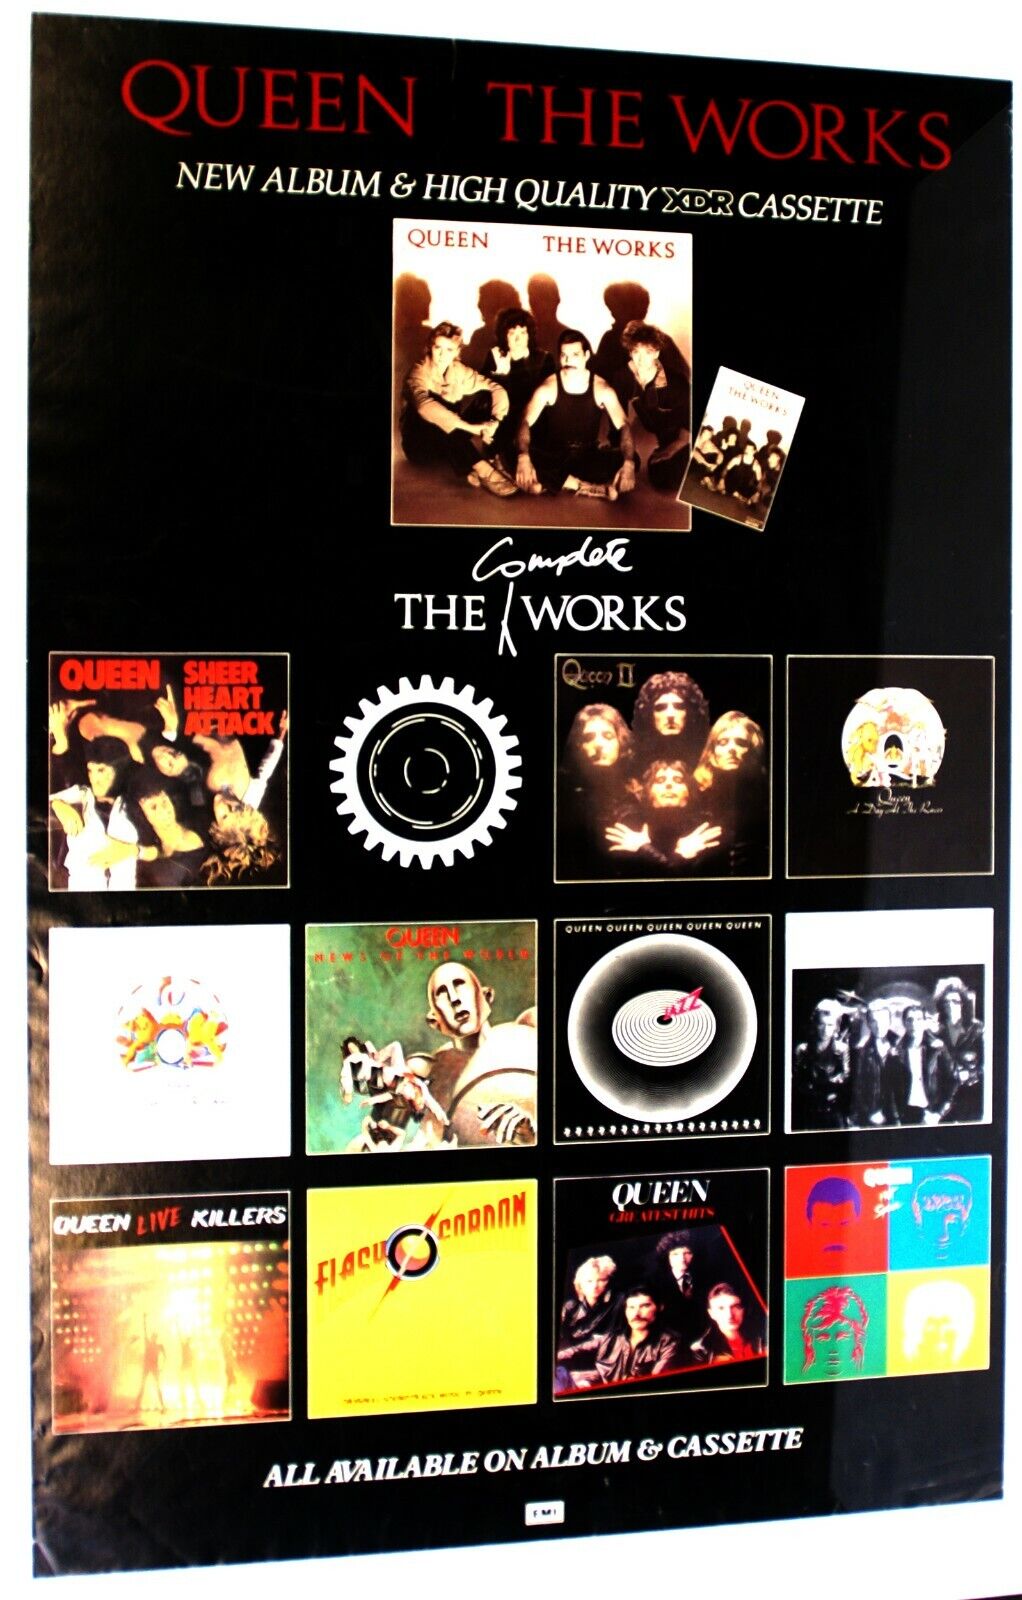 Queen Freddie Poster EMI UK Promo The Works LP/The Complete Works Boxset 1985